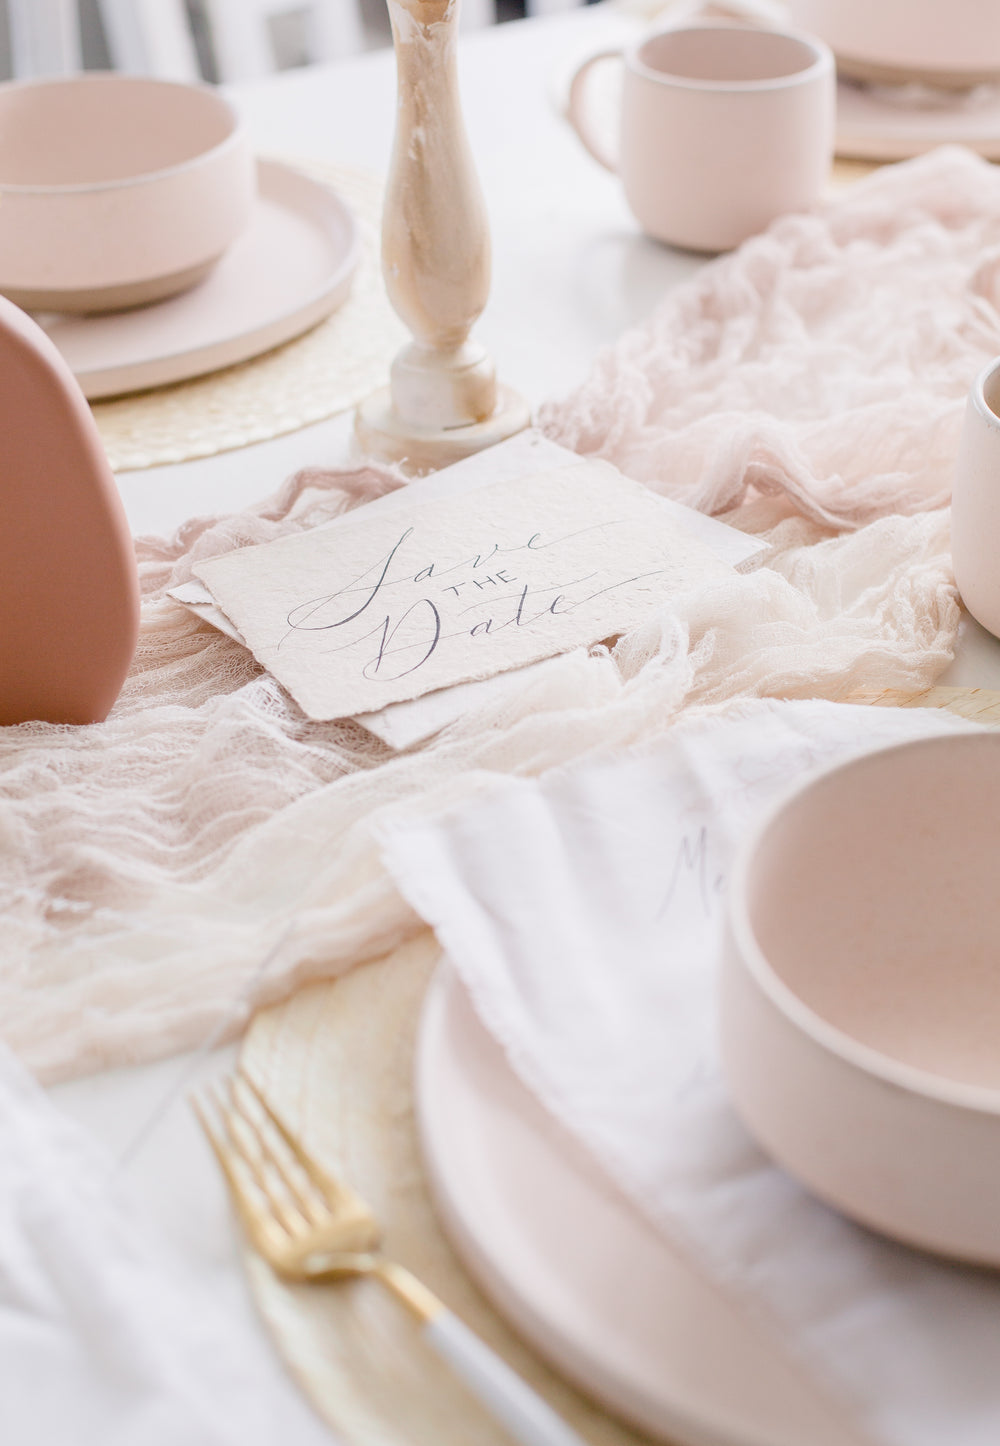 save the date table setting